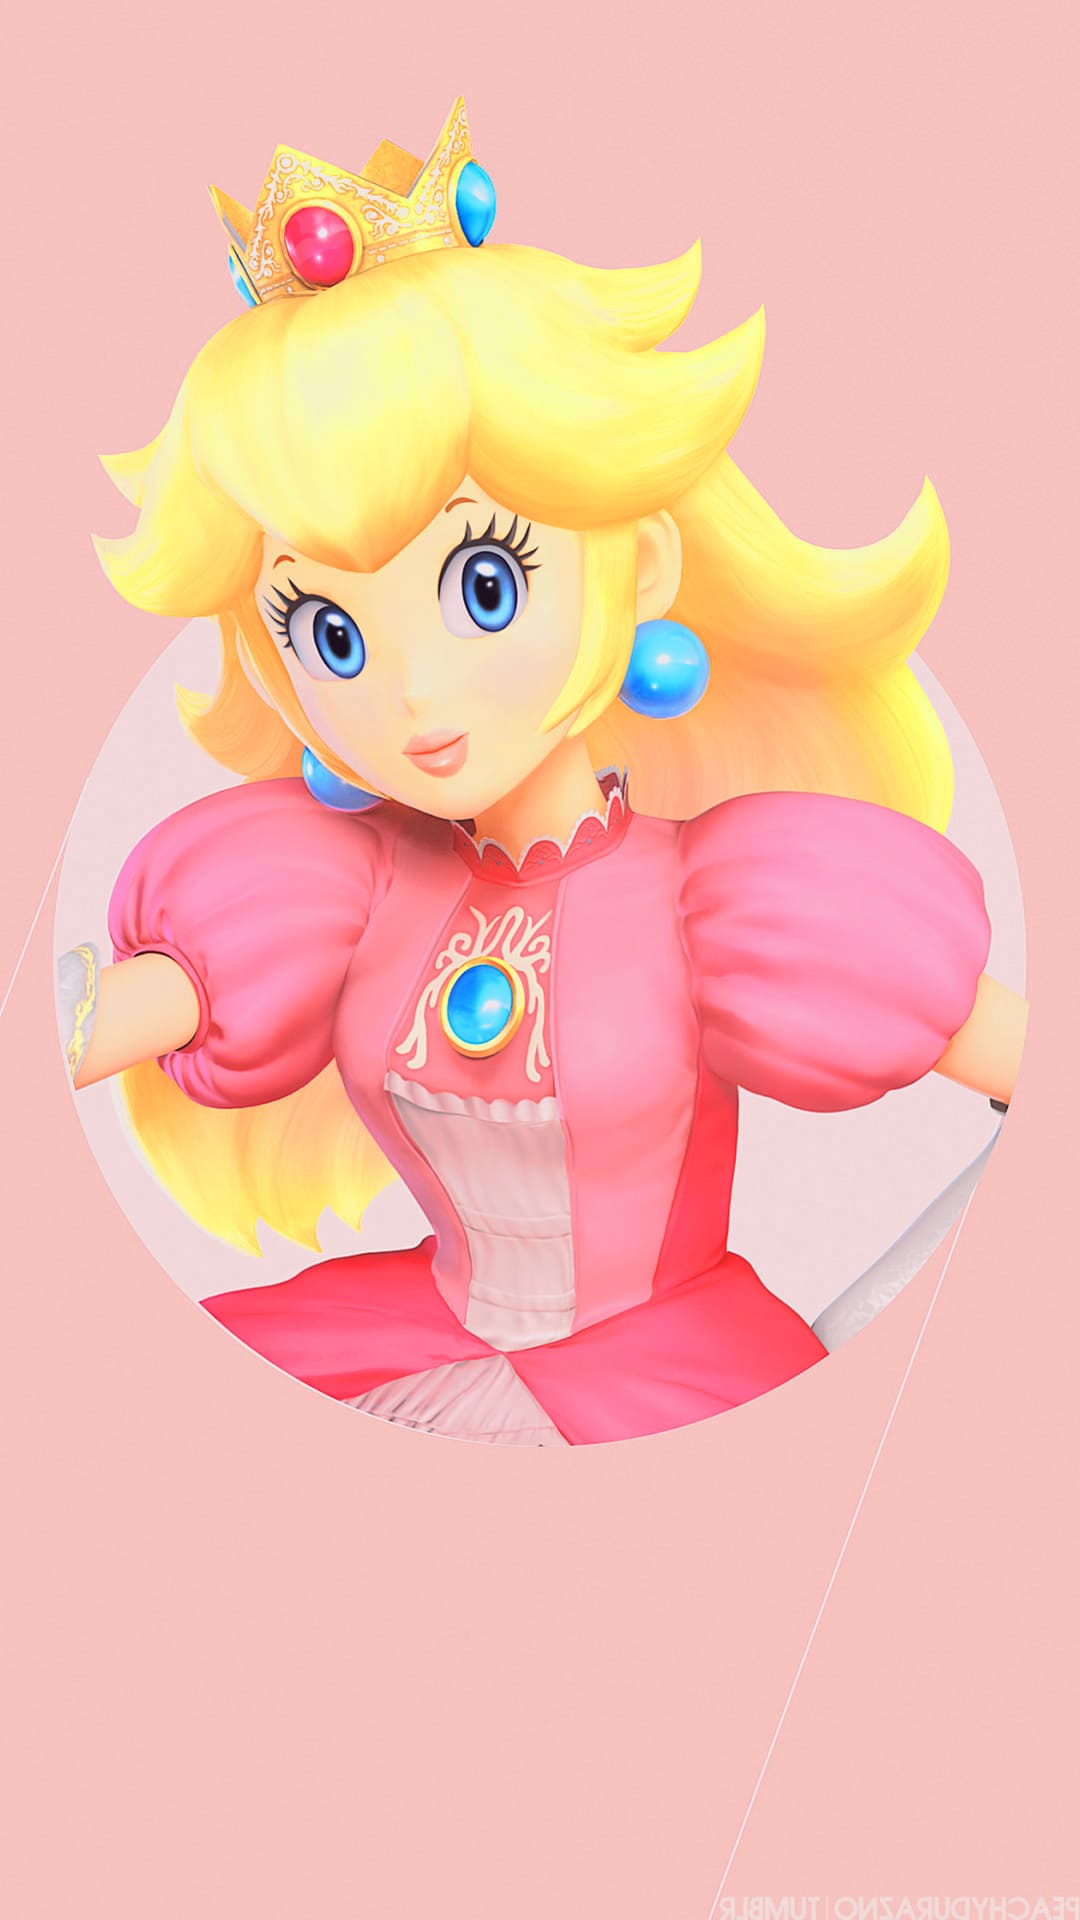 Peach is a fictional character in the Mario franchise and the princess of the Mushroom Kingdom. - Princess Peach